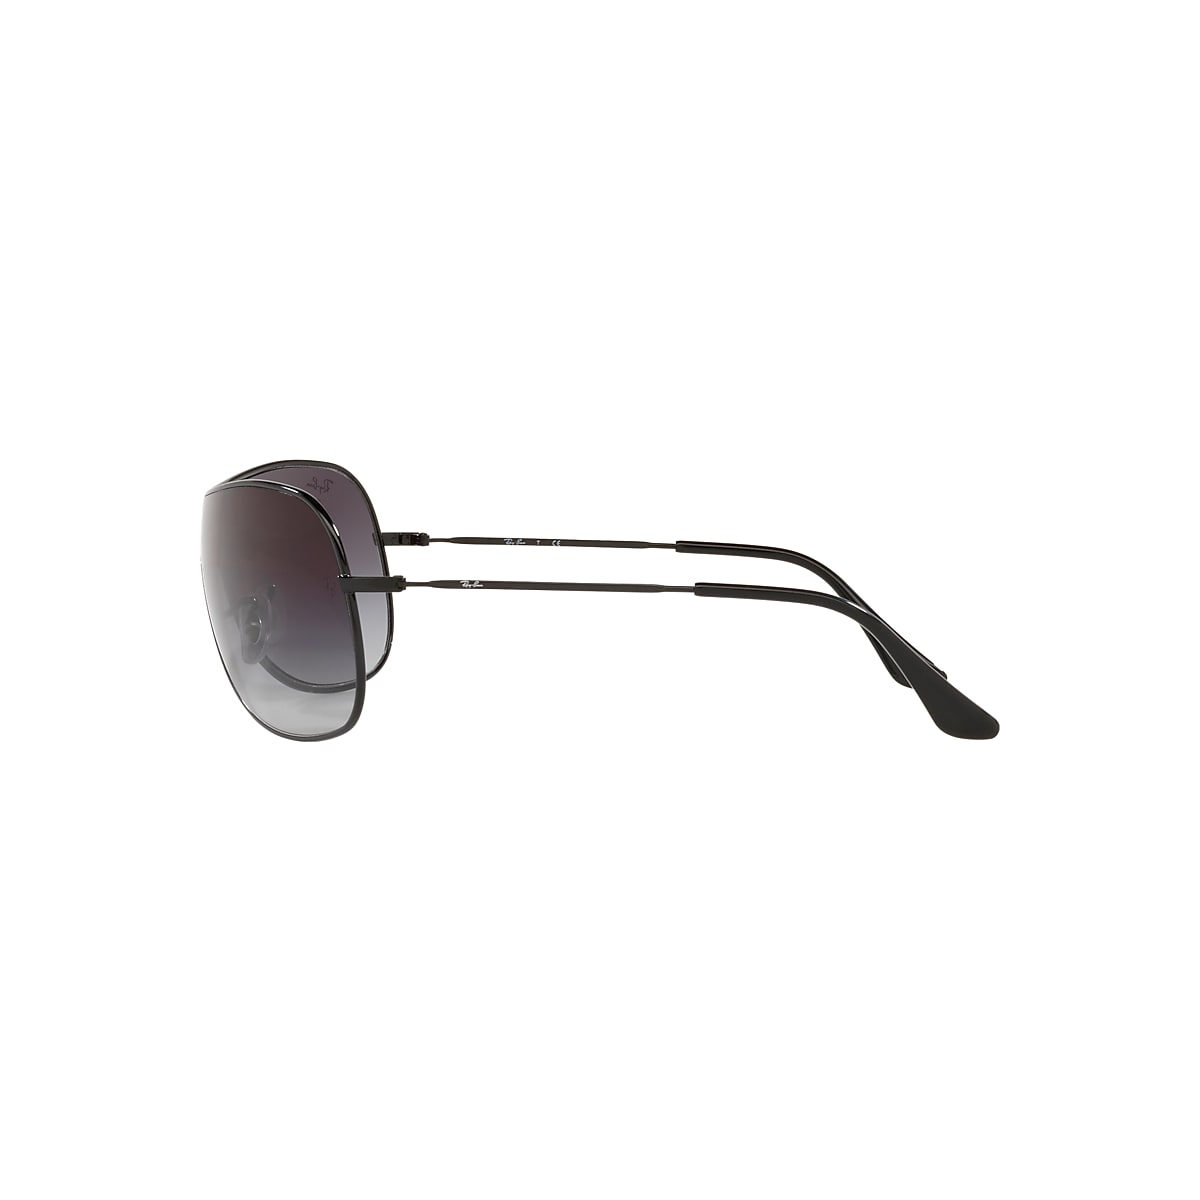 Rb3211 Sunglasses in Black and Grey | Ray-Ban®